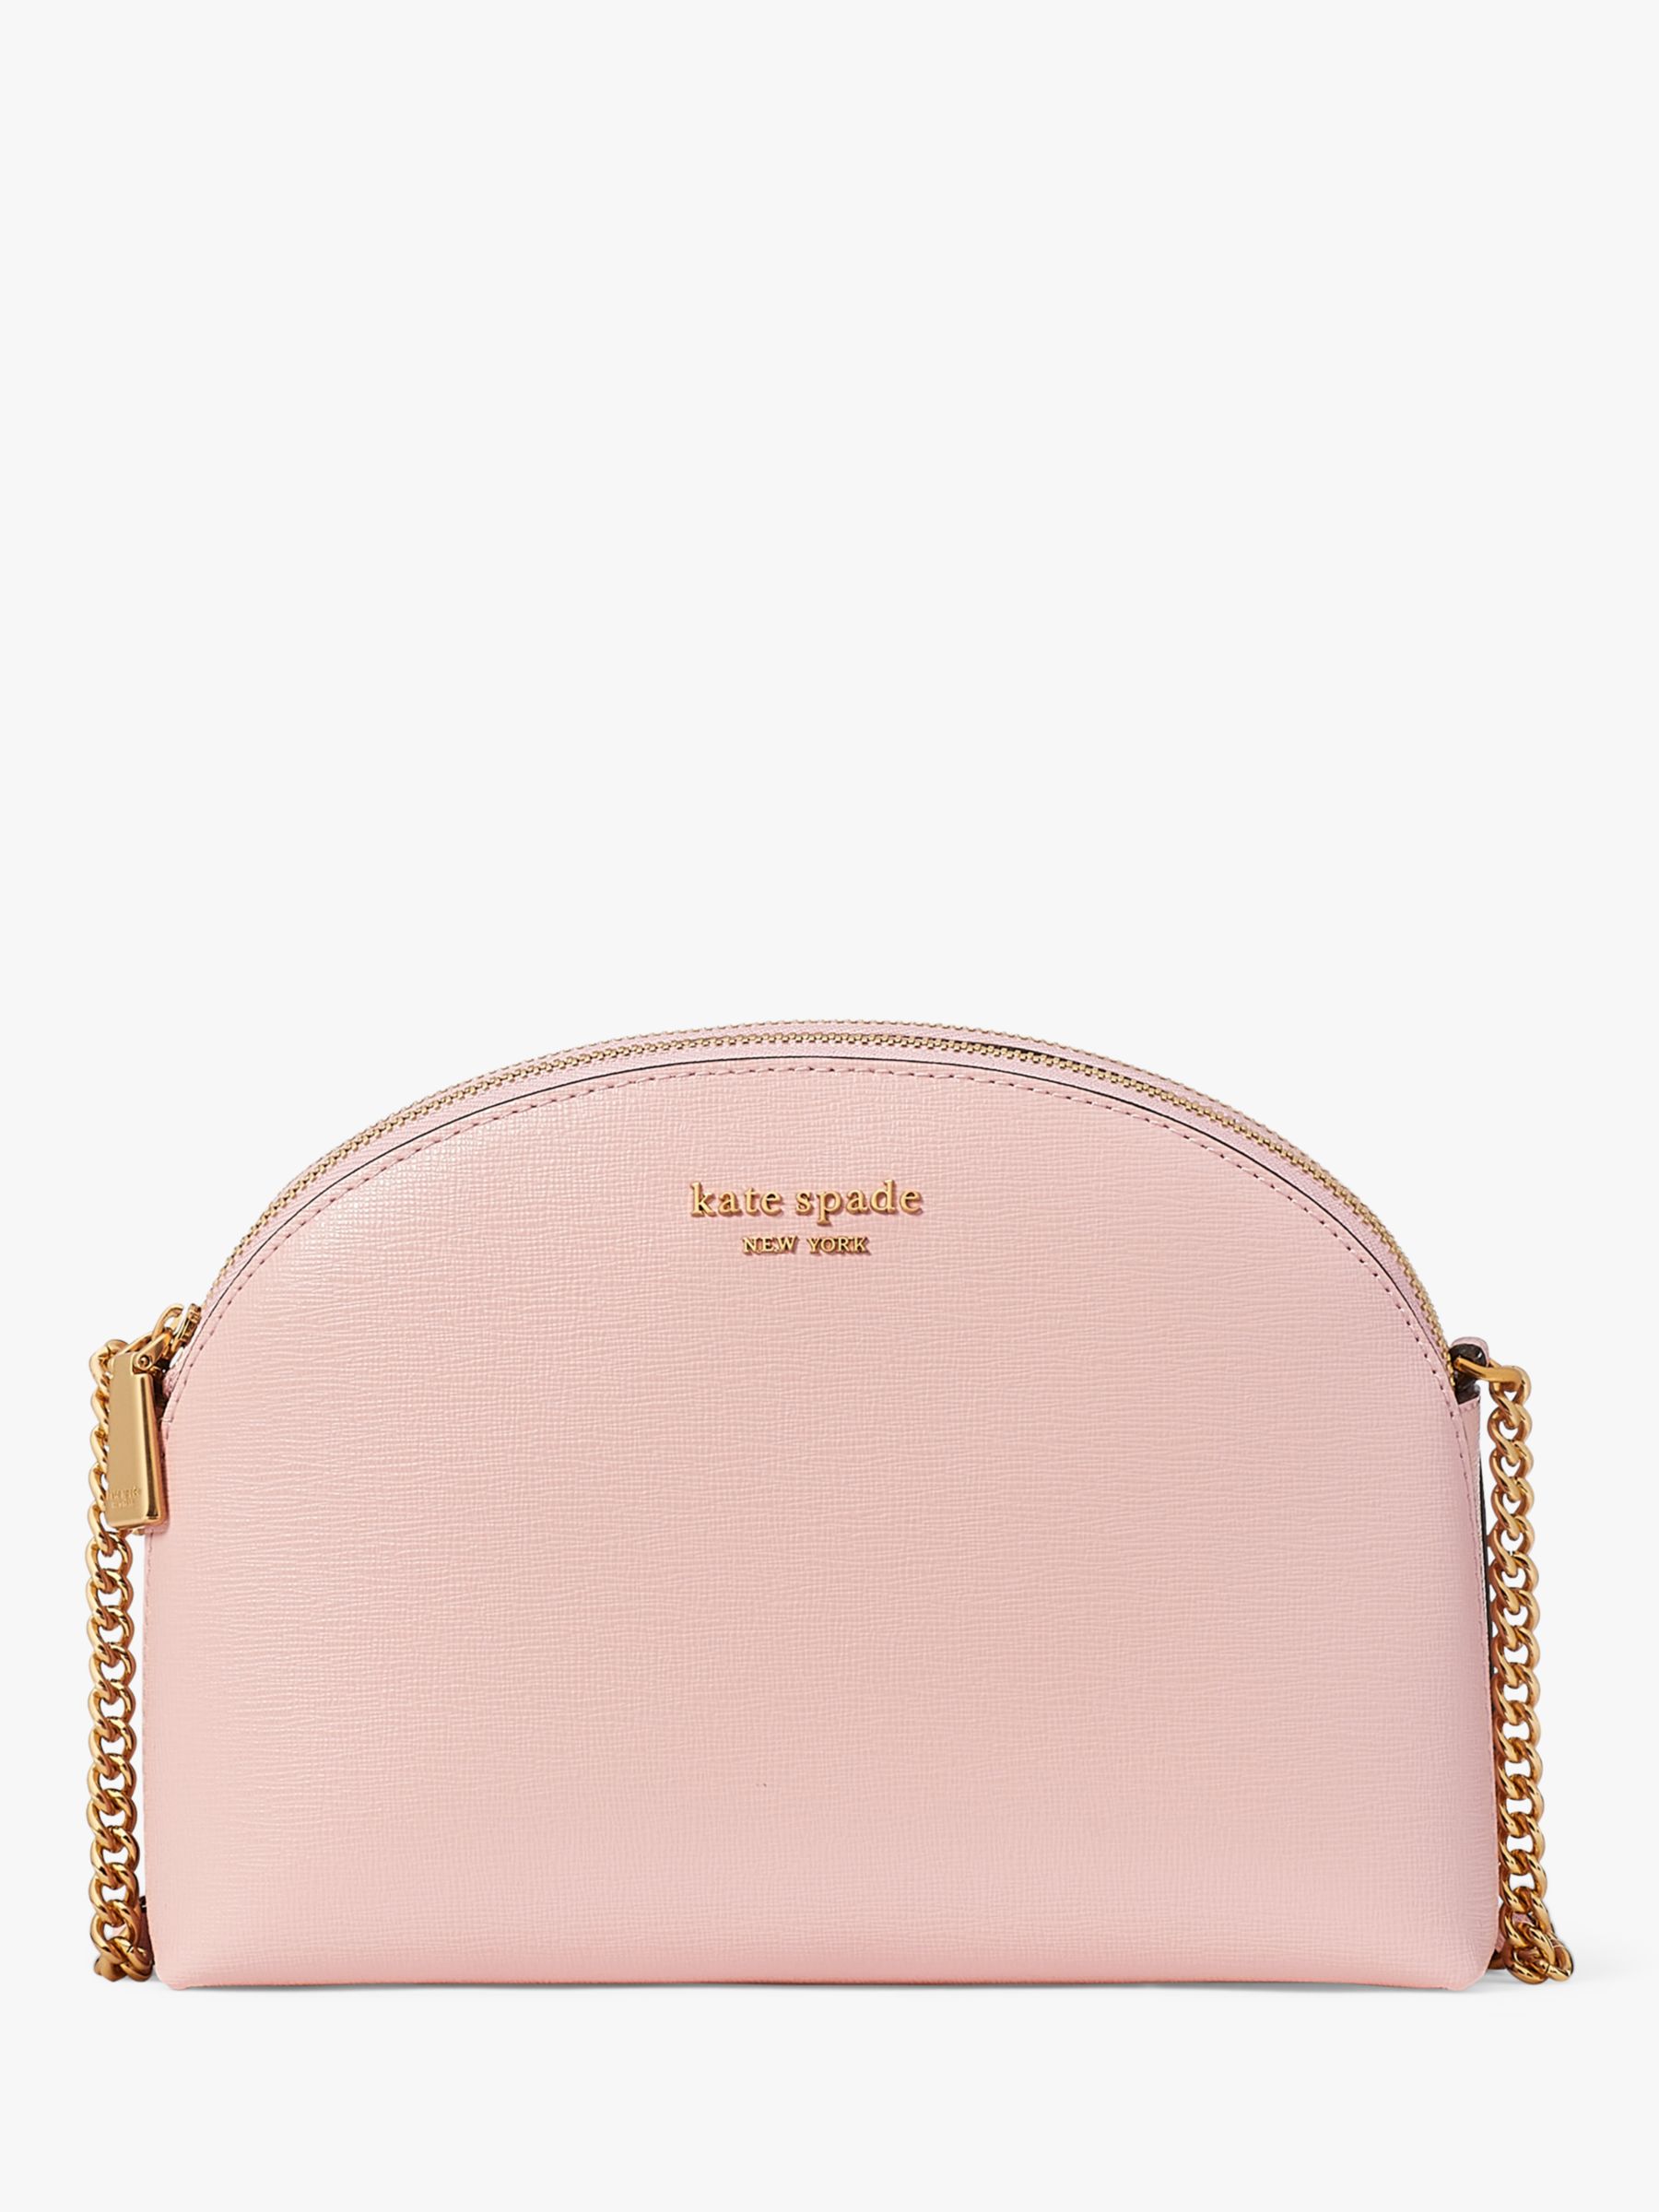 Buy kate spade new york Morgan Dome Leather Double Zip Cross Body Bag Online at johnlewis.com